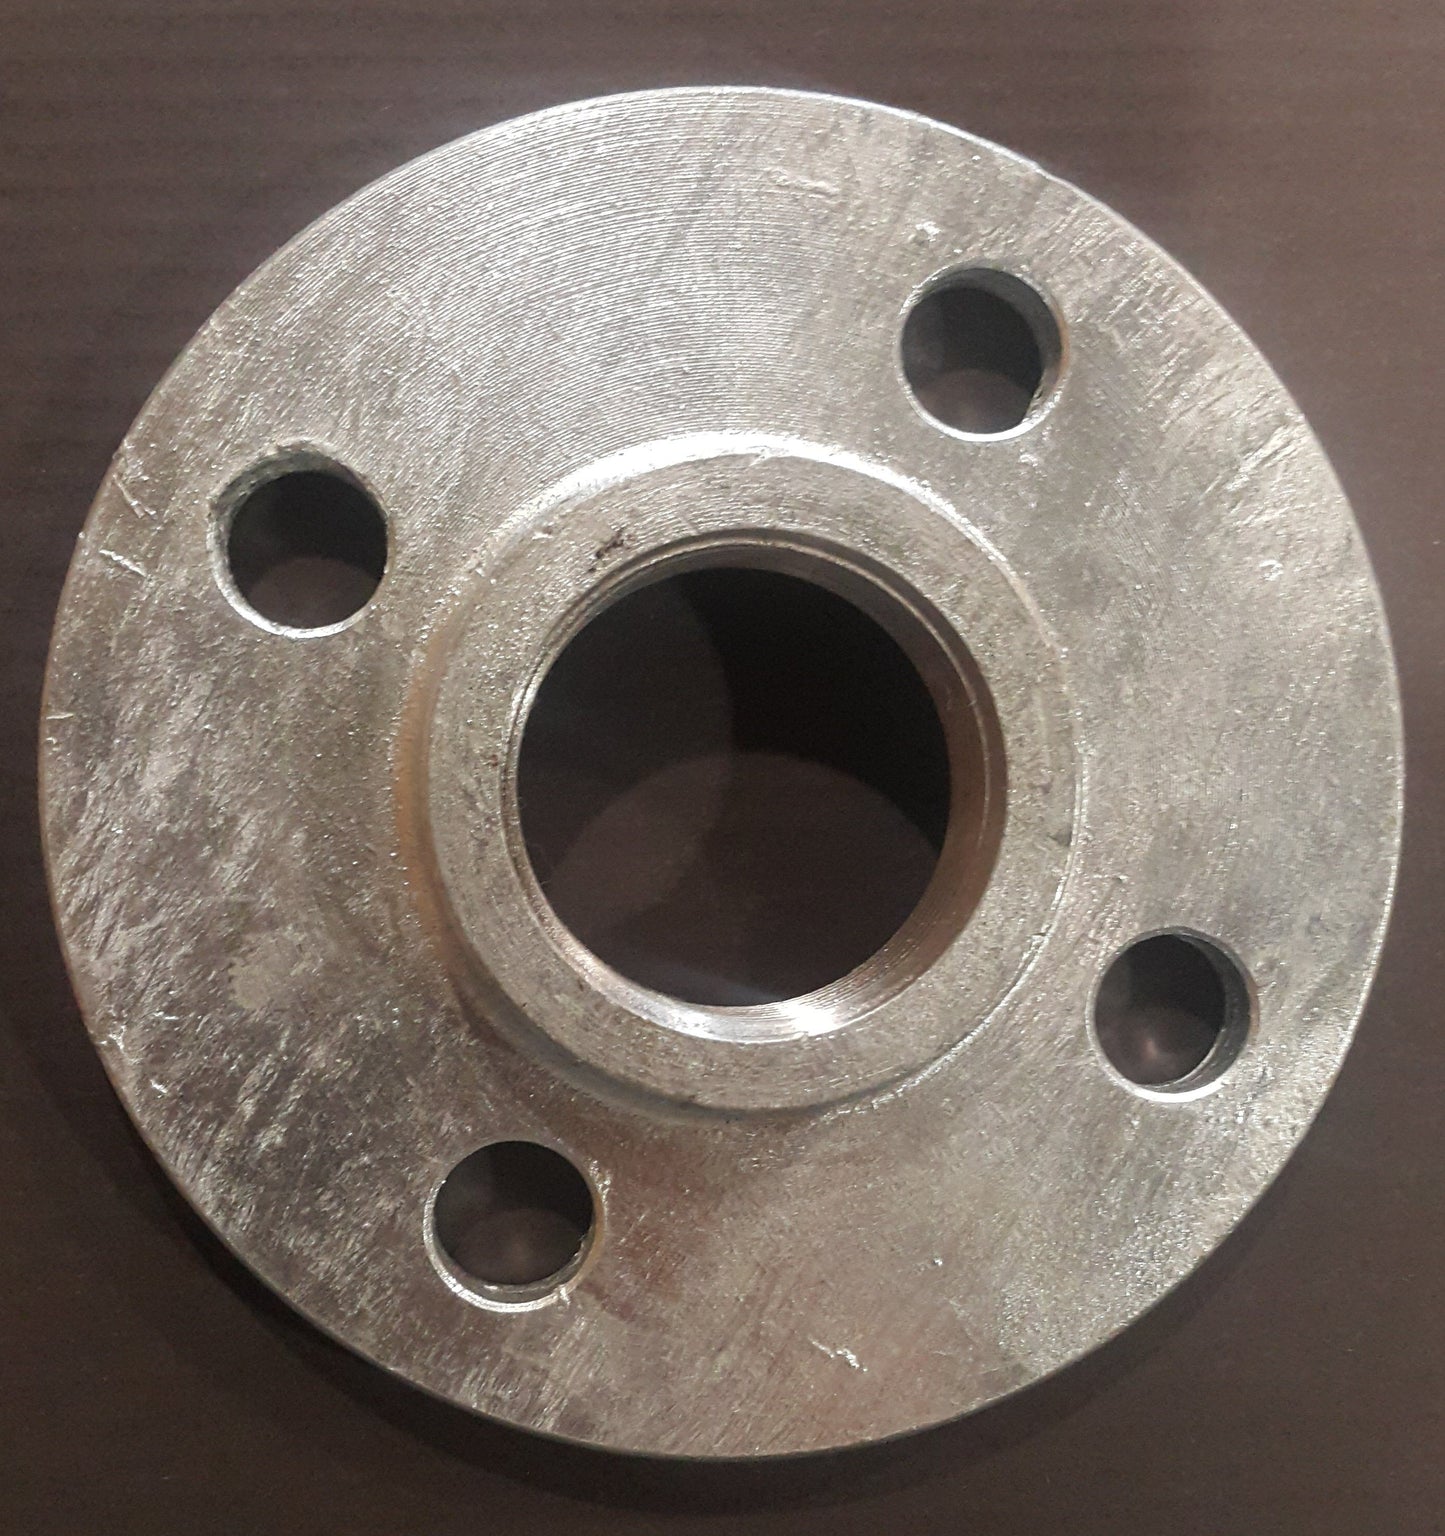 32mm or 1 1/4" Flange (for pipe OD +-43mm) - Aluminium Flanges